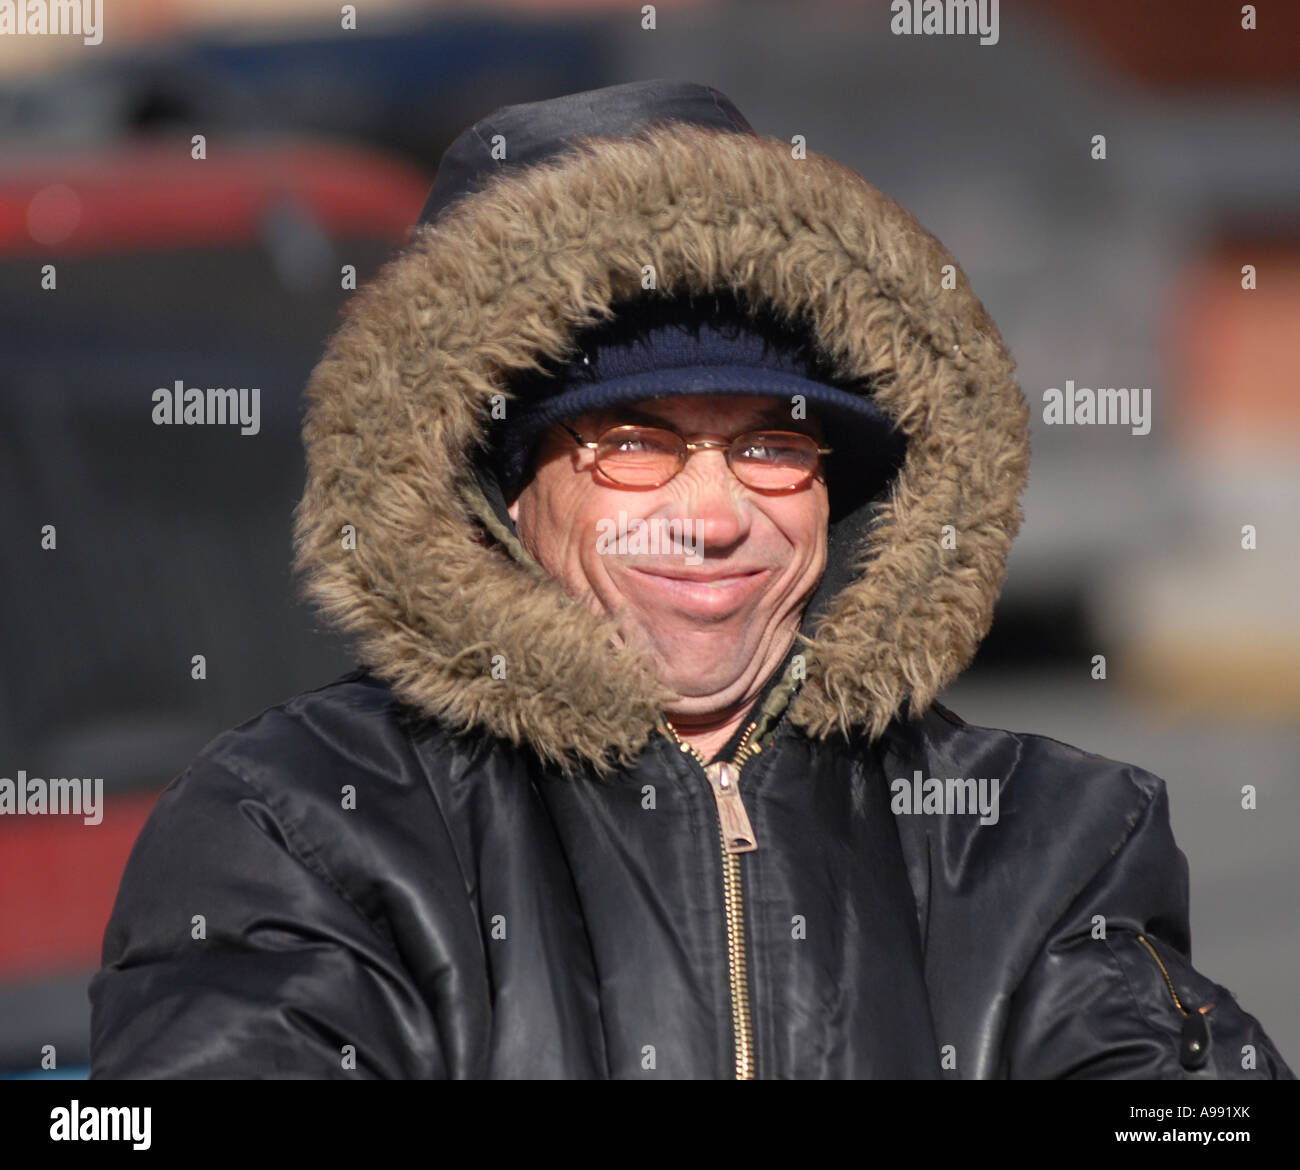 A Man makes a funny face as Very cold winter wind blows on his face Stock  Photo - Alamy